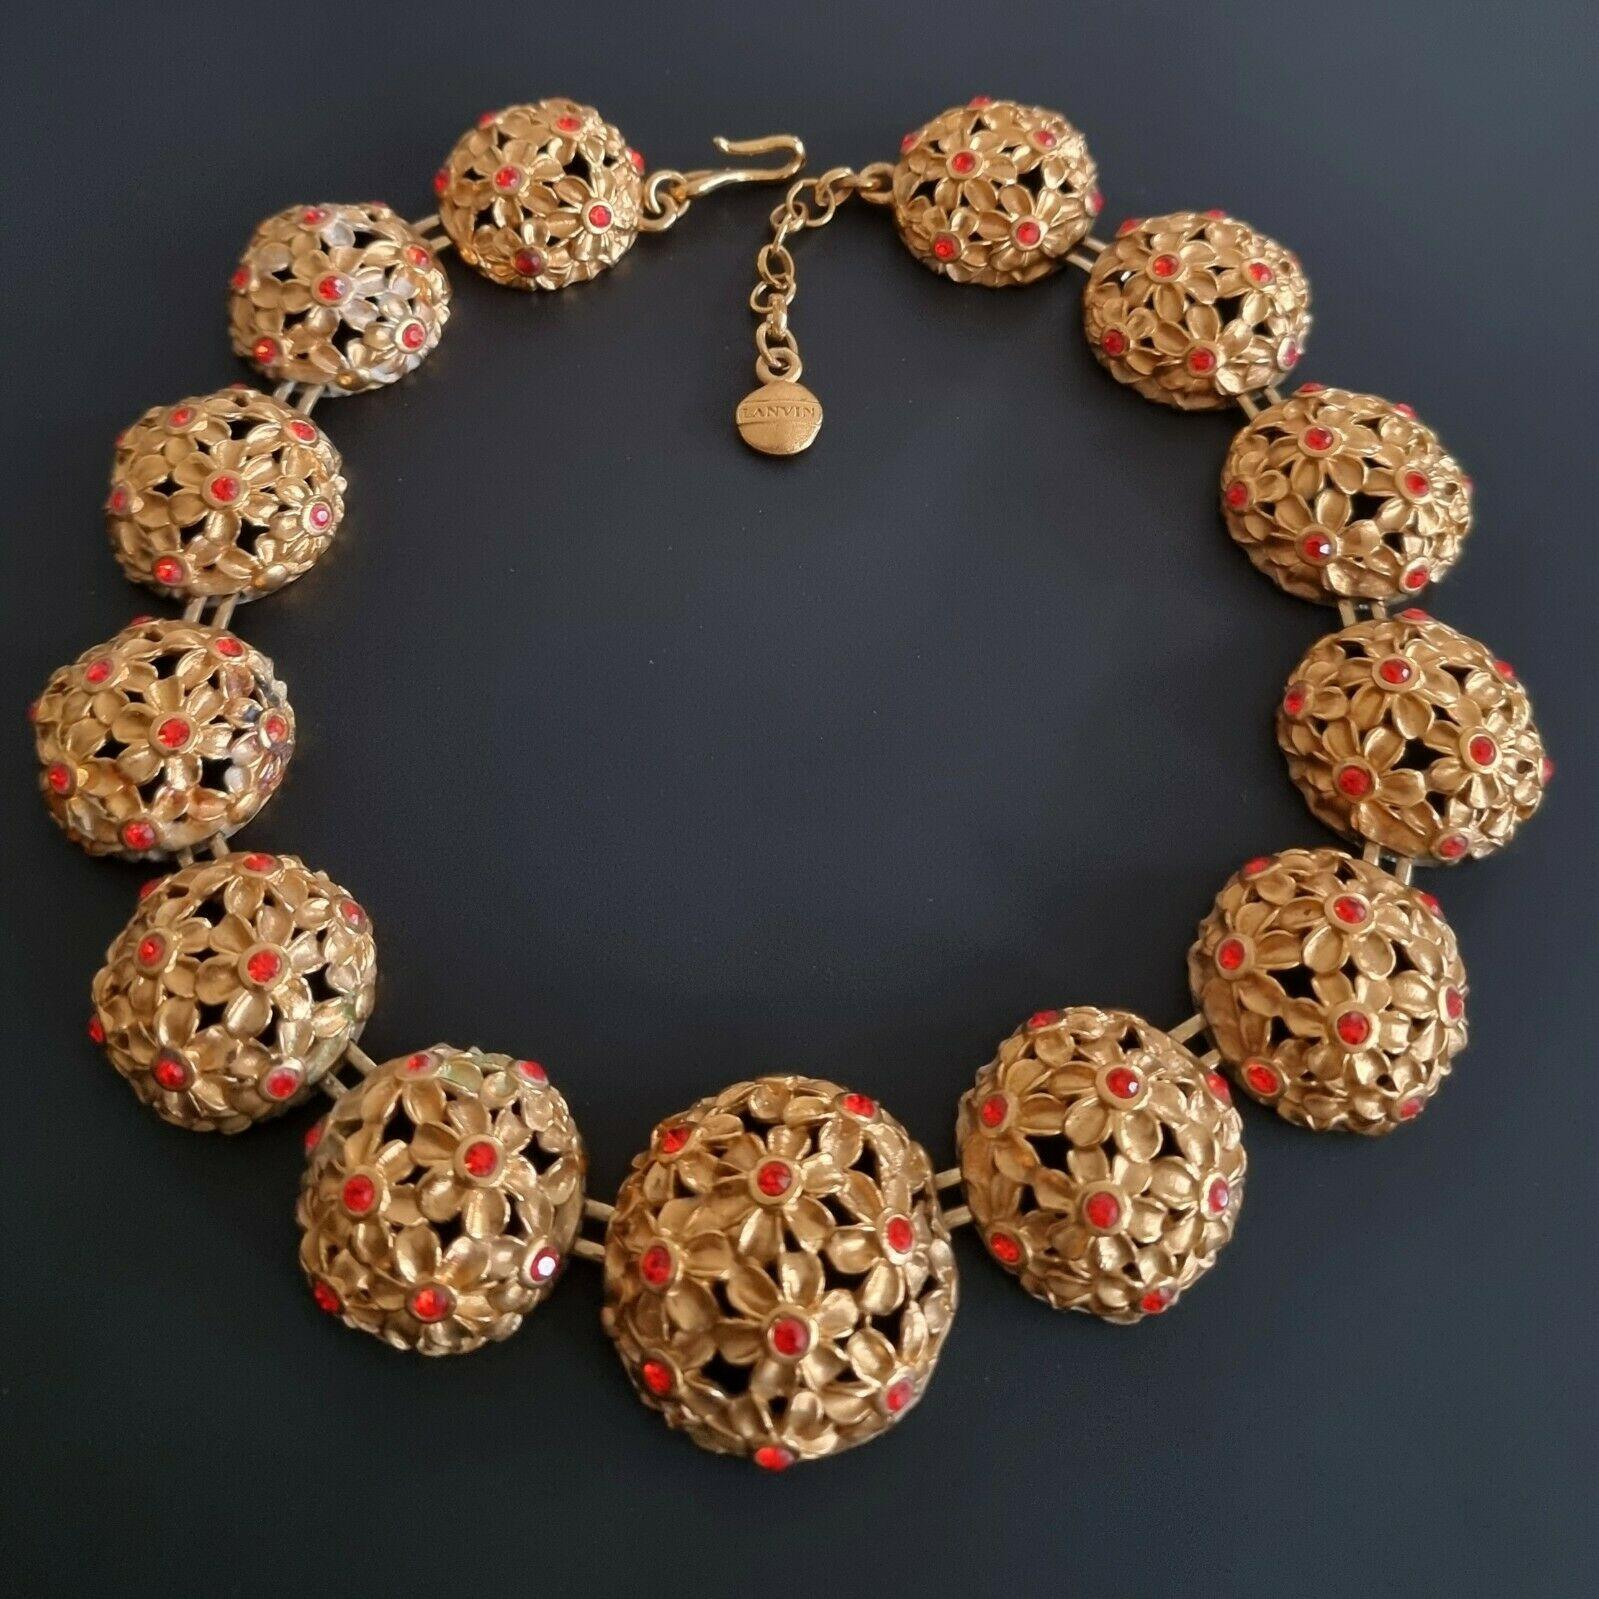 Sublime important vintage NECKLACE,
in gold metal and glass rhinestones,
by French haute couture designer LANVIN,
signed Lanvin Germany,
total length (with clasp chain) 47 cm, weight 172 g,
good condition.


FR:
Sublimissime important COLLIER